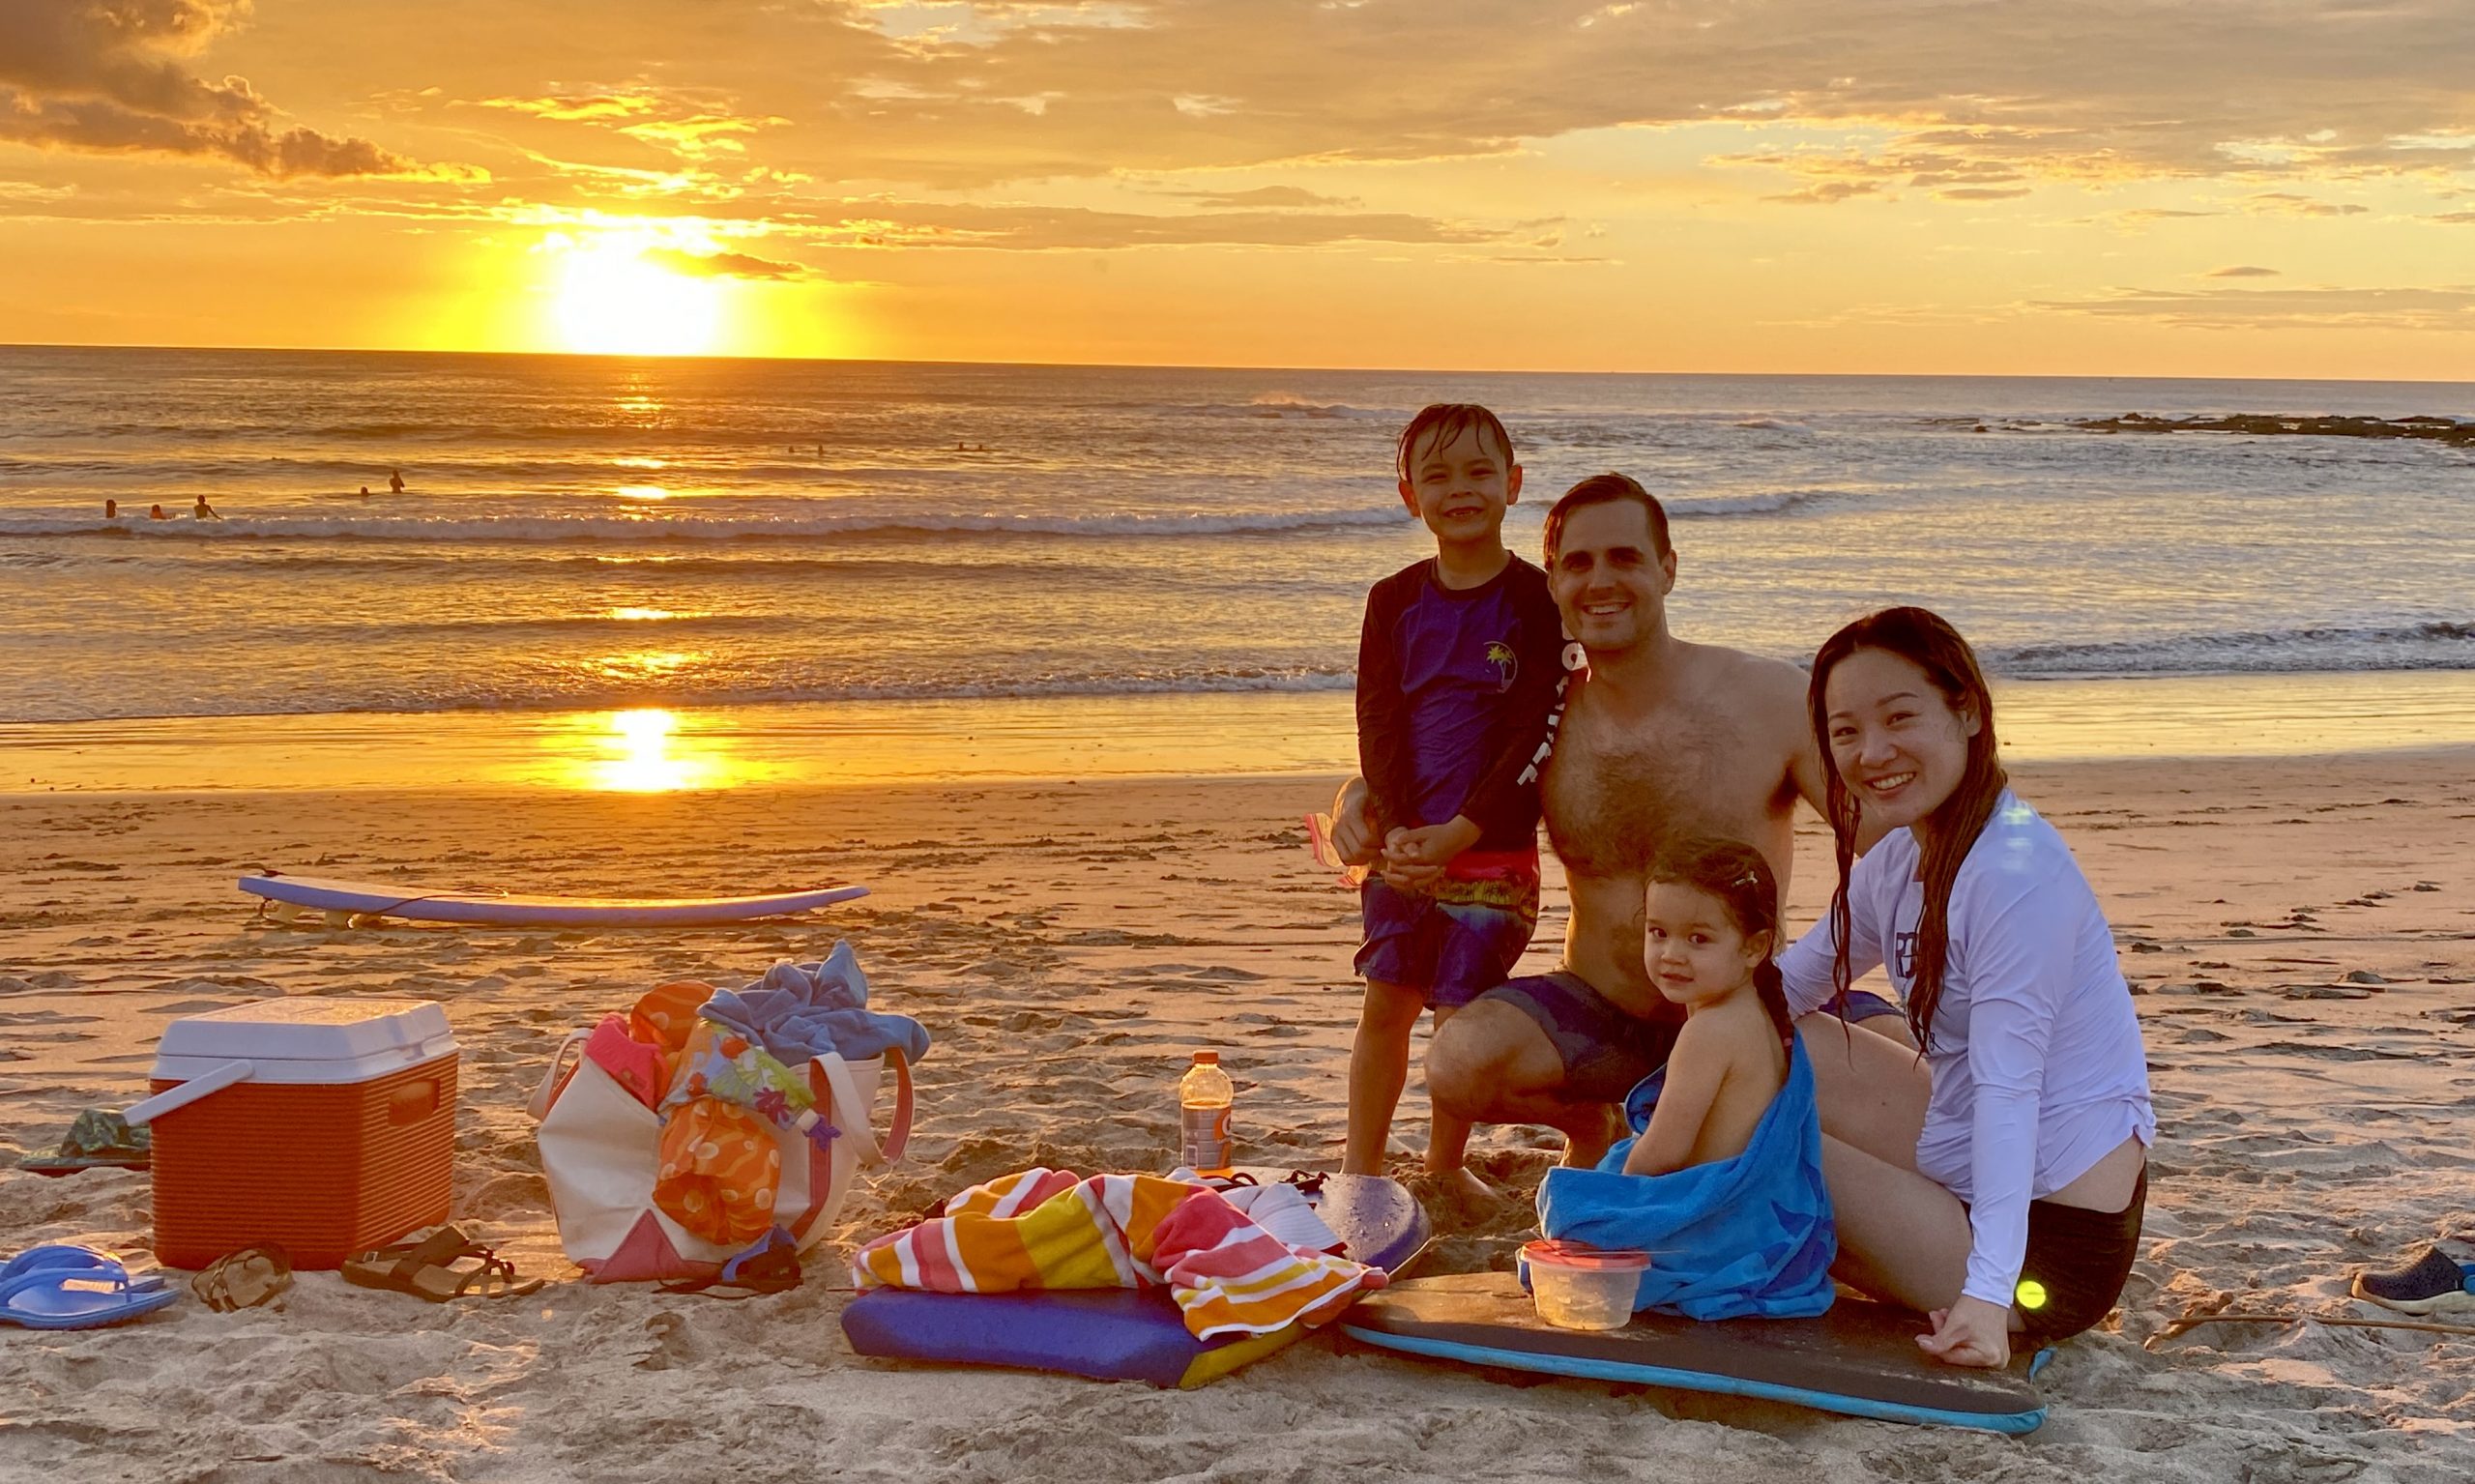 Our family enjoying a sunset at the beach